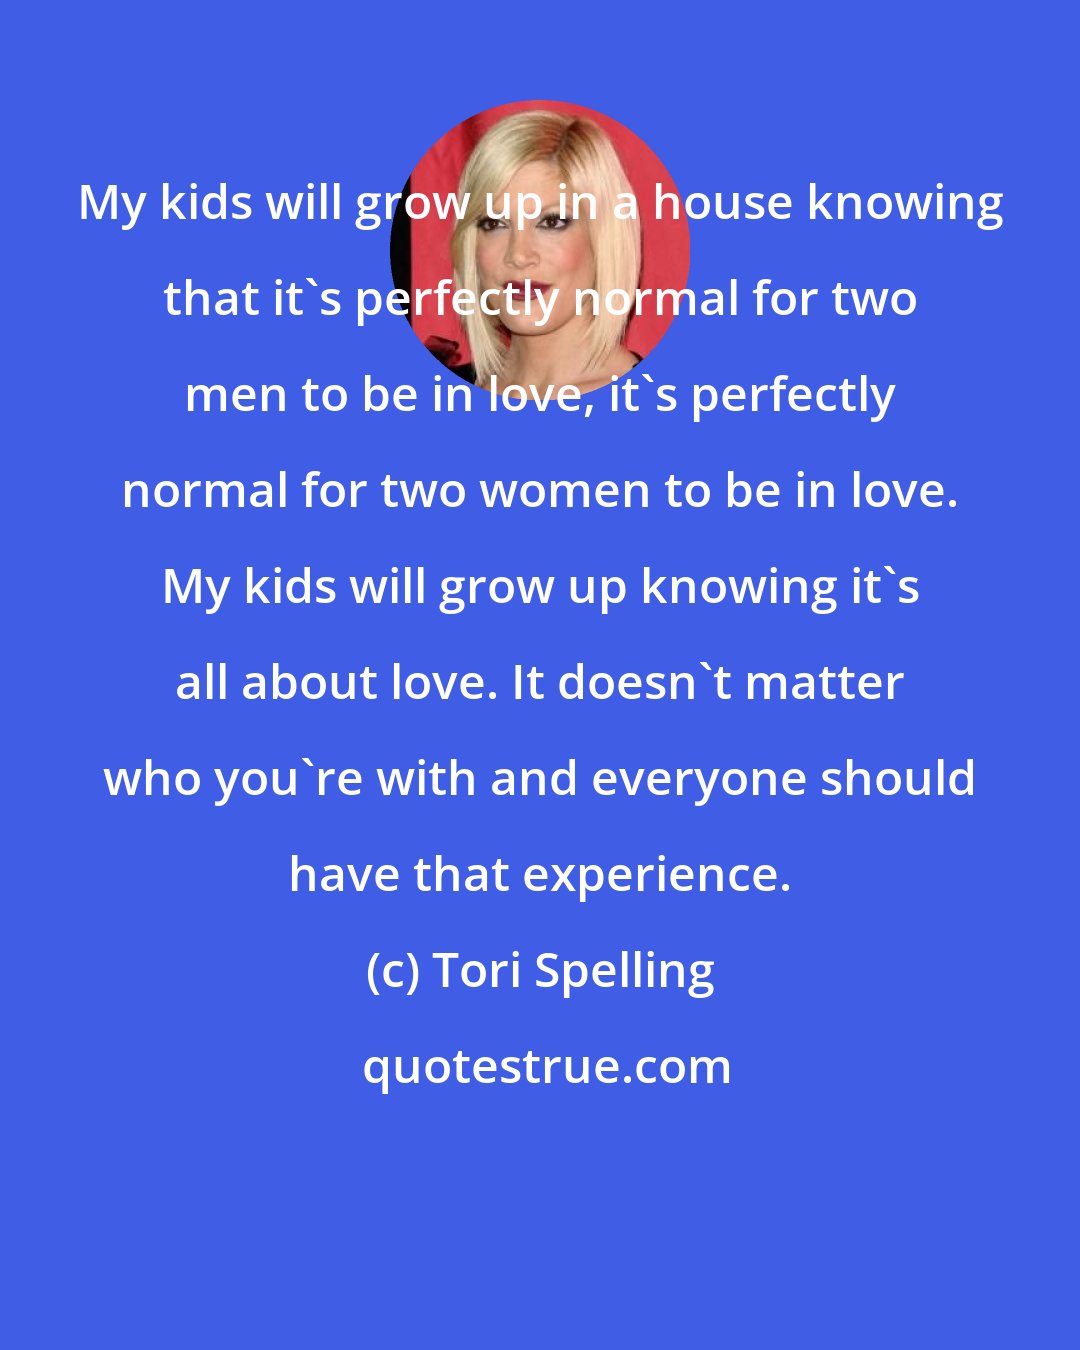 Tori Spelling: My kids will grow up in a house knowing that it's perfectly normal for two men to be in love, it's perfectly normal for two women to be in love. My kids will grow up knowing it's all about love. It doesn't matter who you're with and everyone should have that experience.